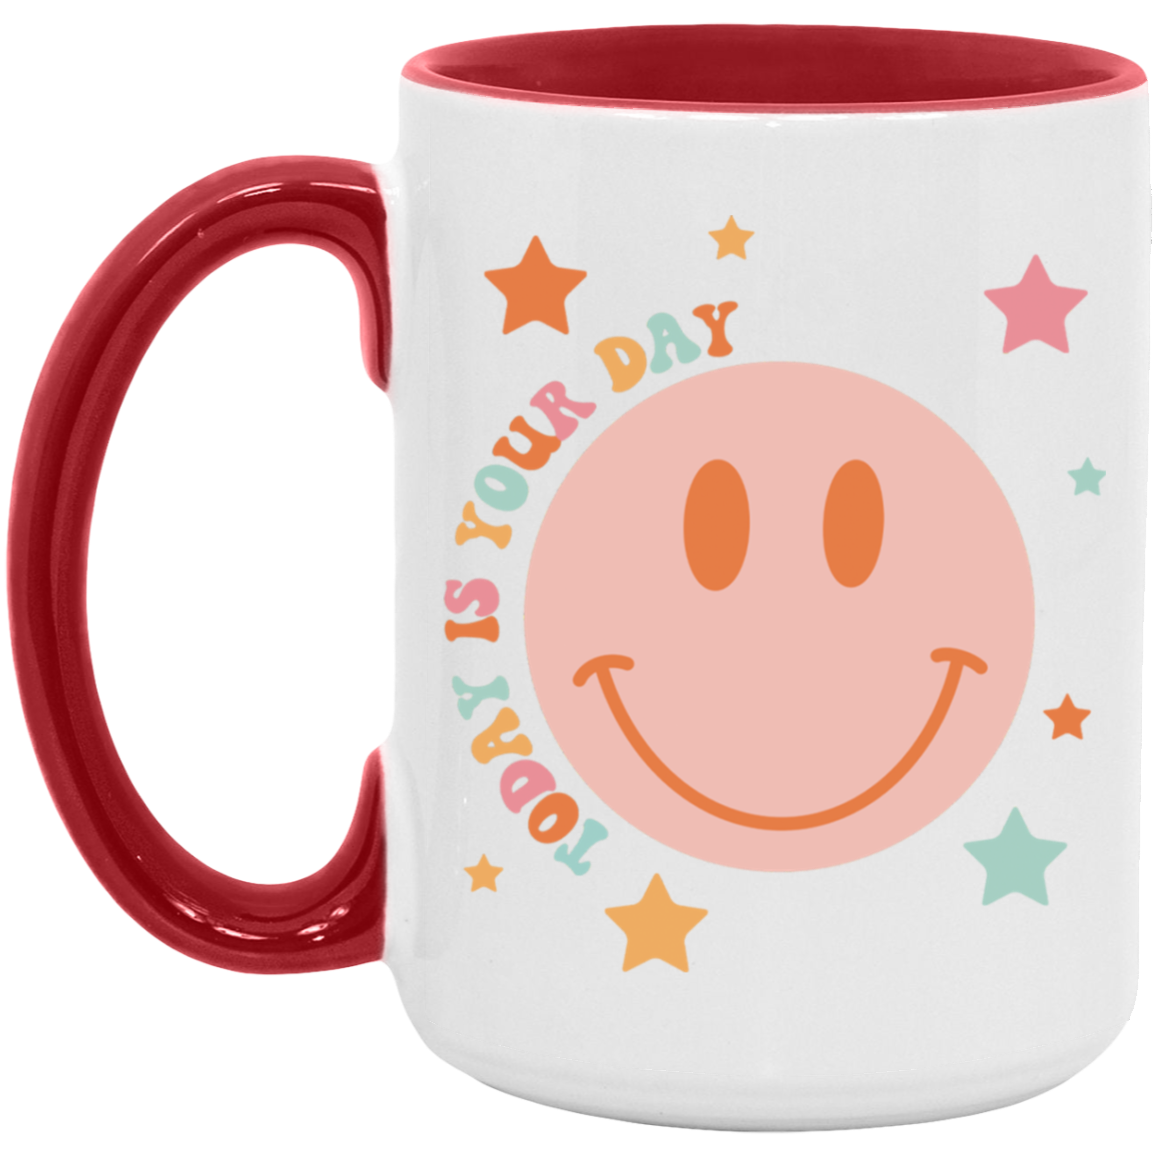 Today Is Your Day Smiley Mug